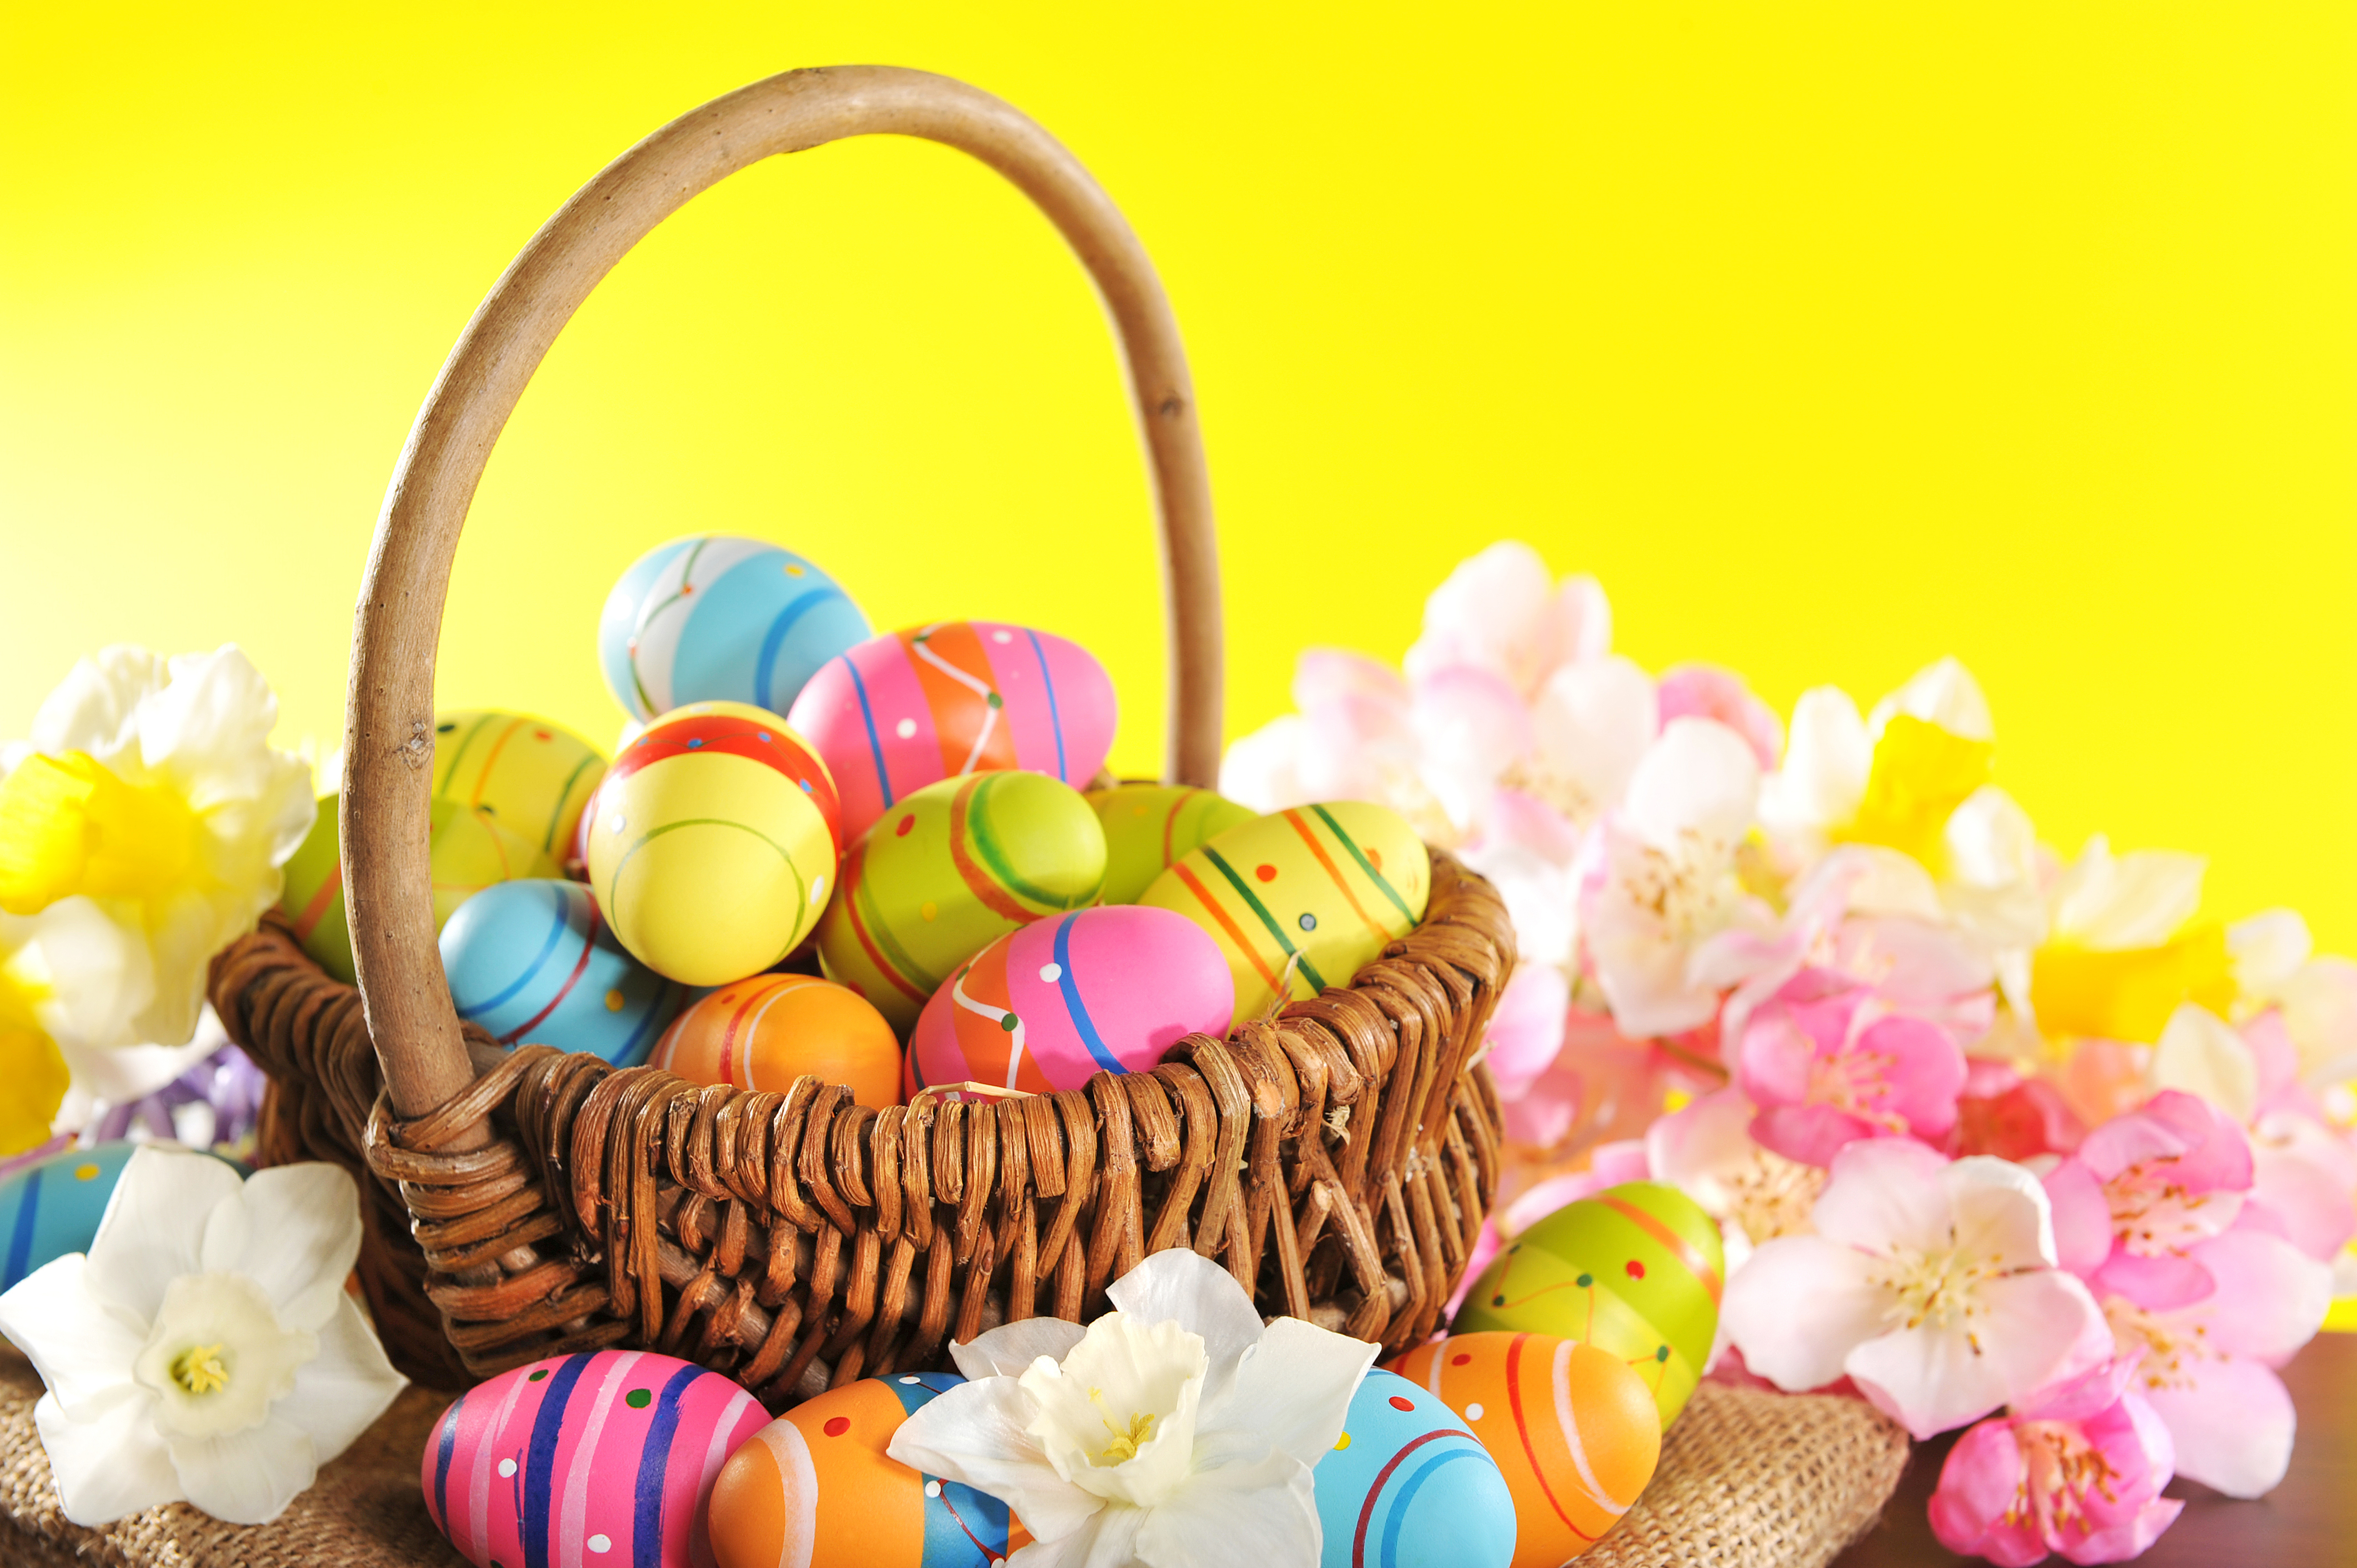 Basket Colorful Easter Easter Egg Flower Holiday Wicker 7003x4660